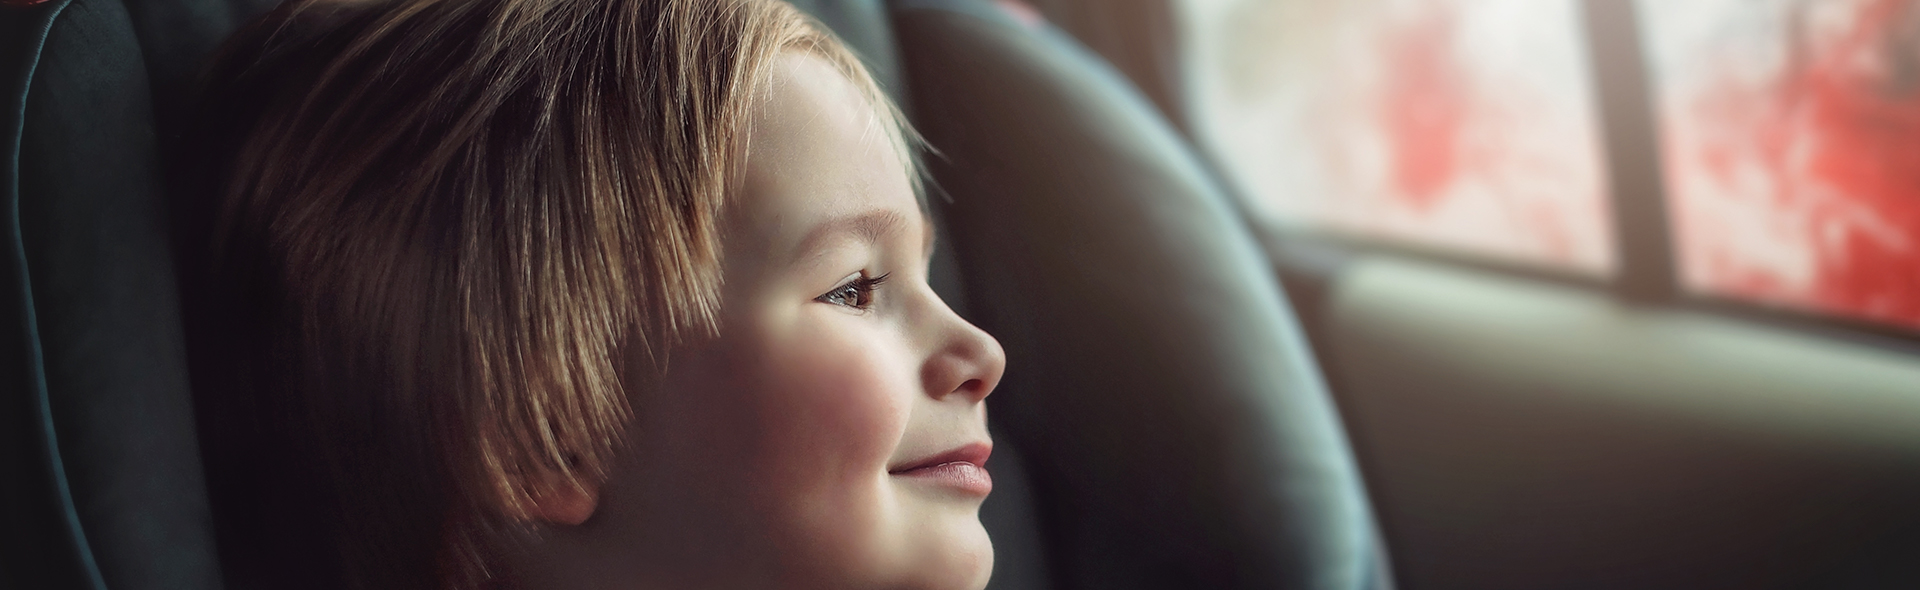 Boy sitting in car smiling and looking out the window